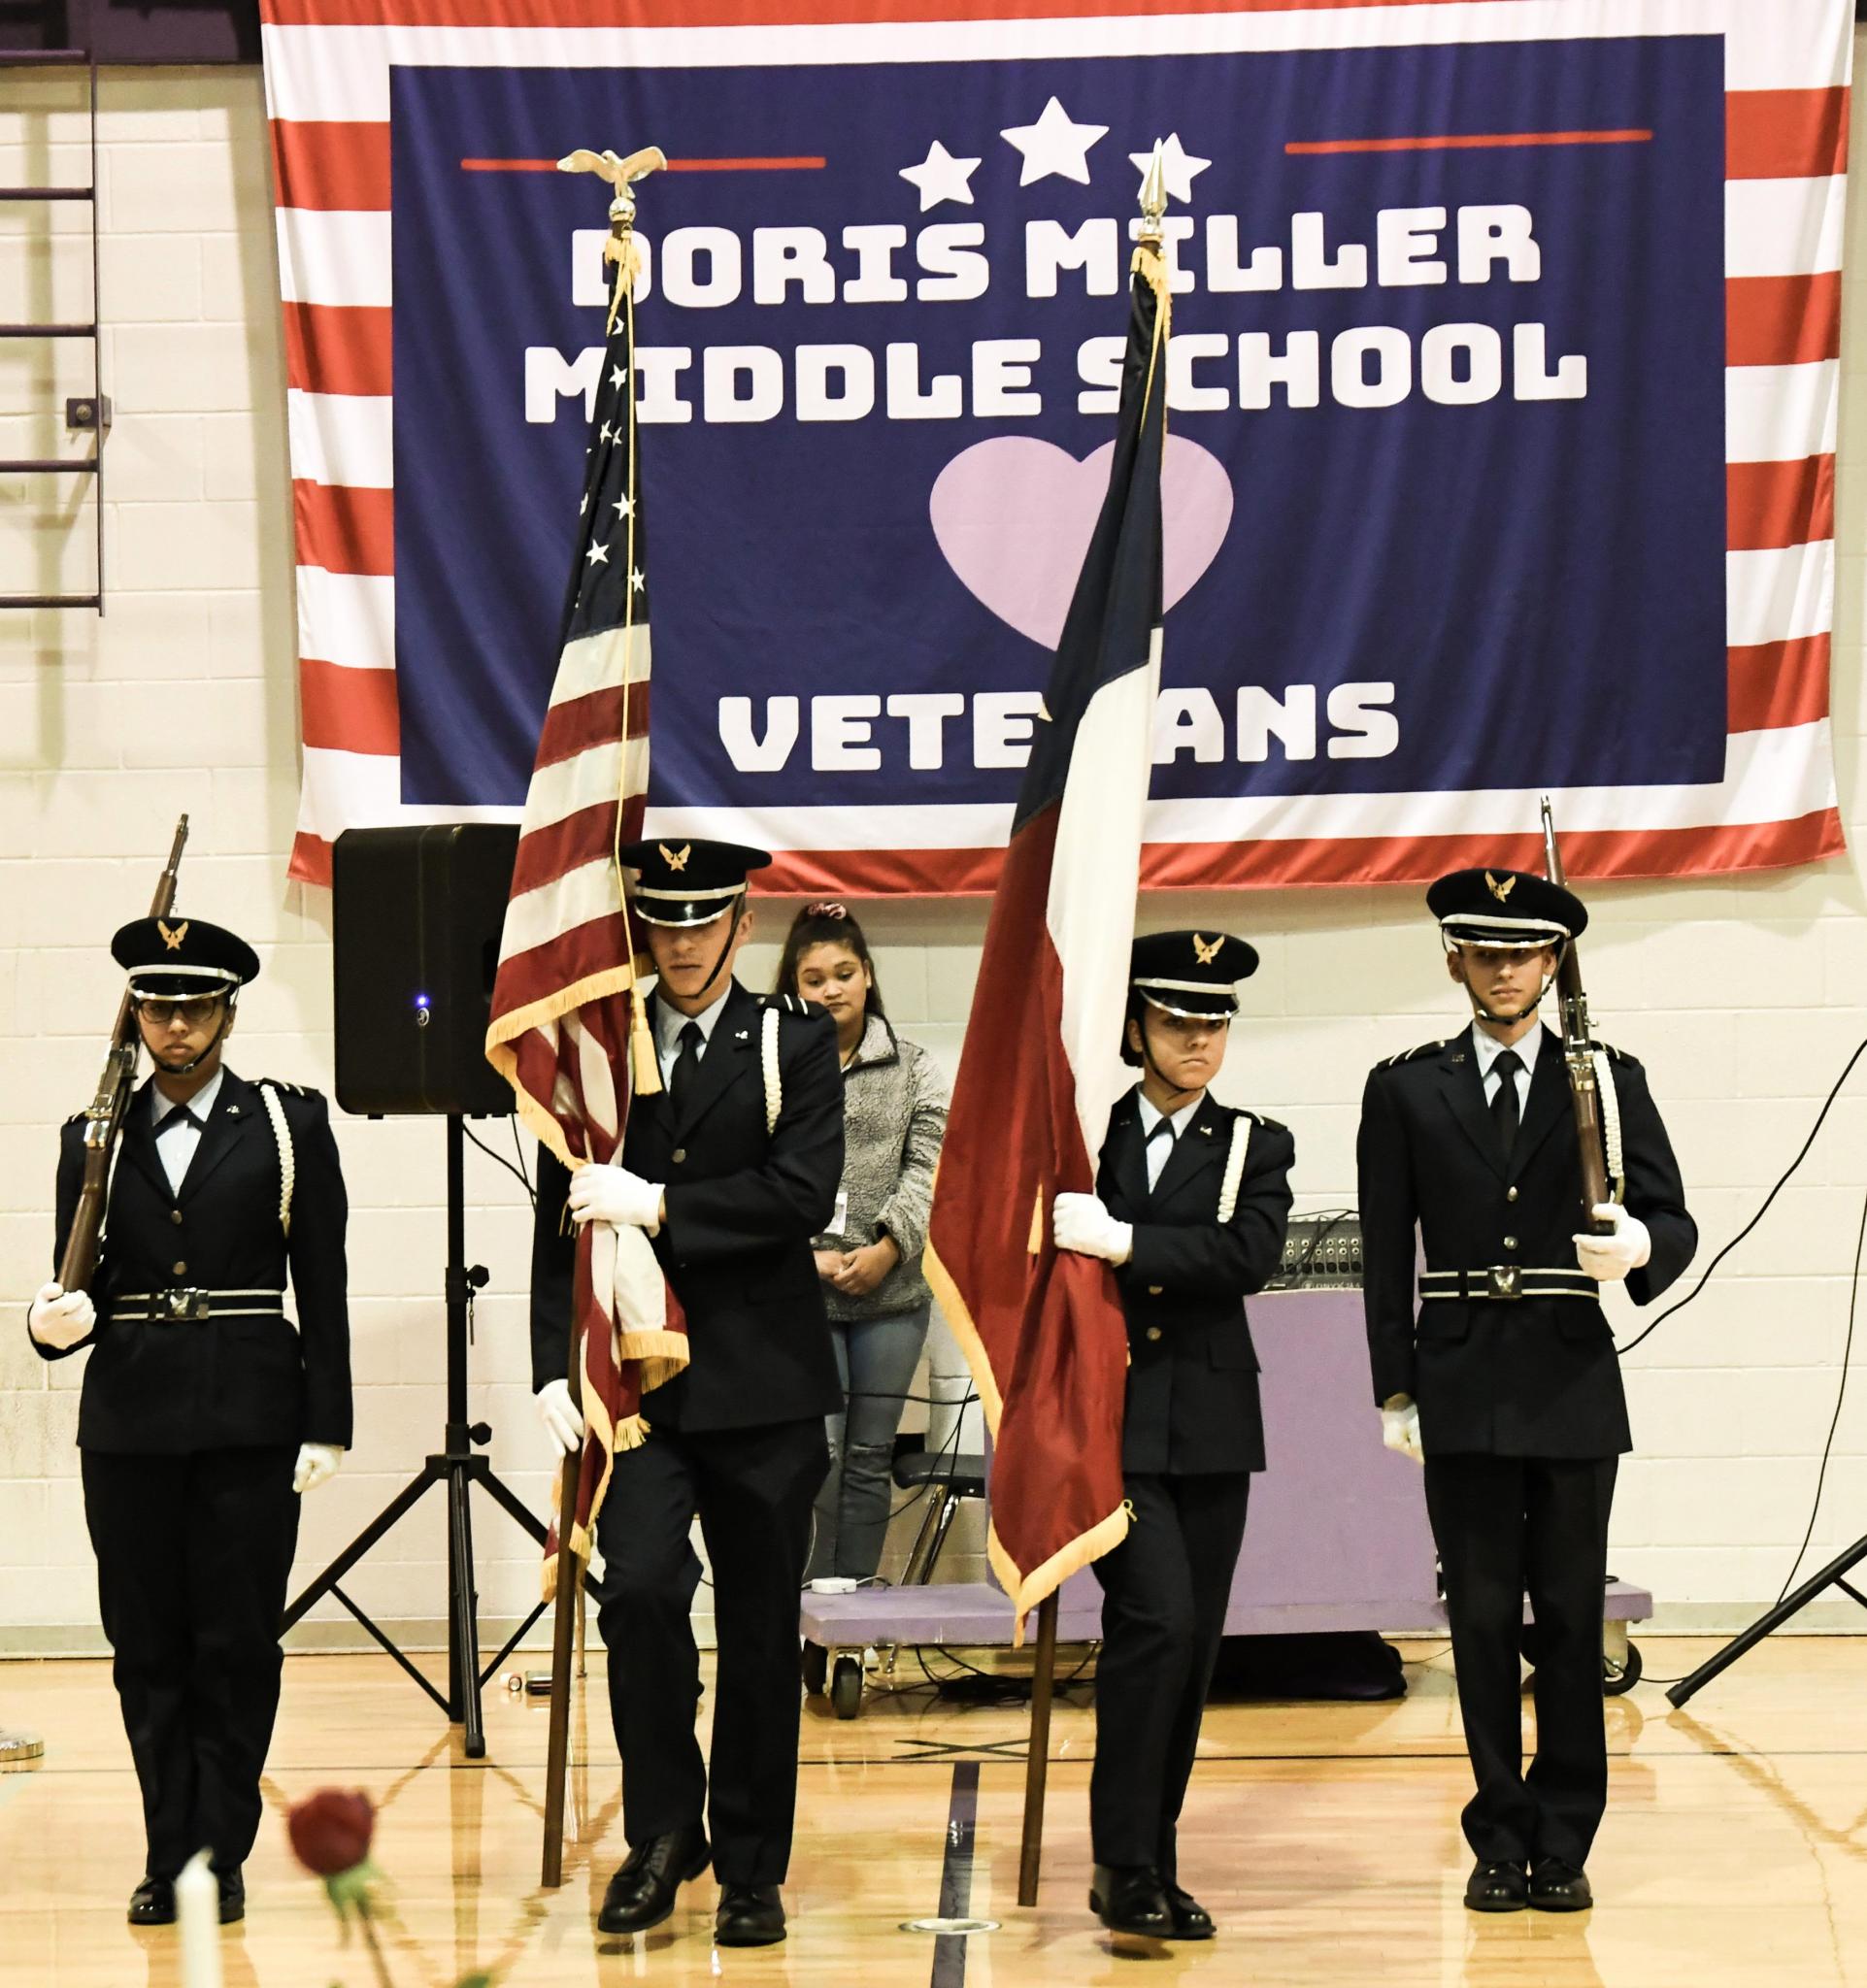 miller school home page